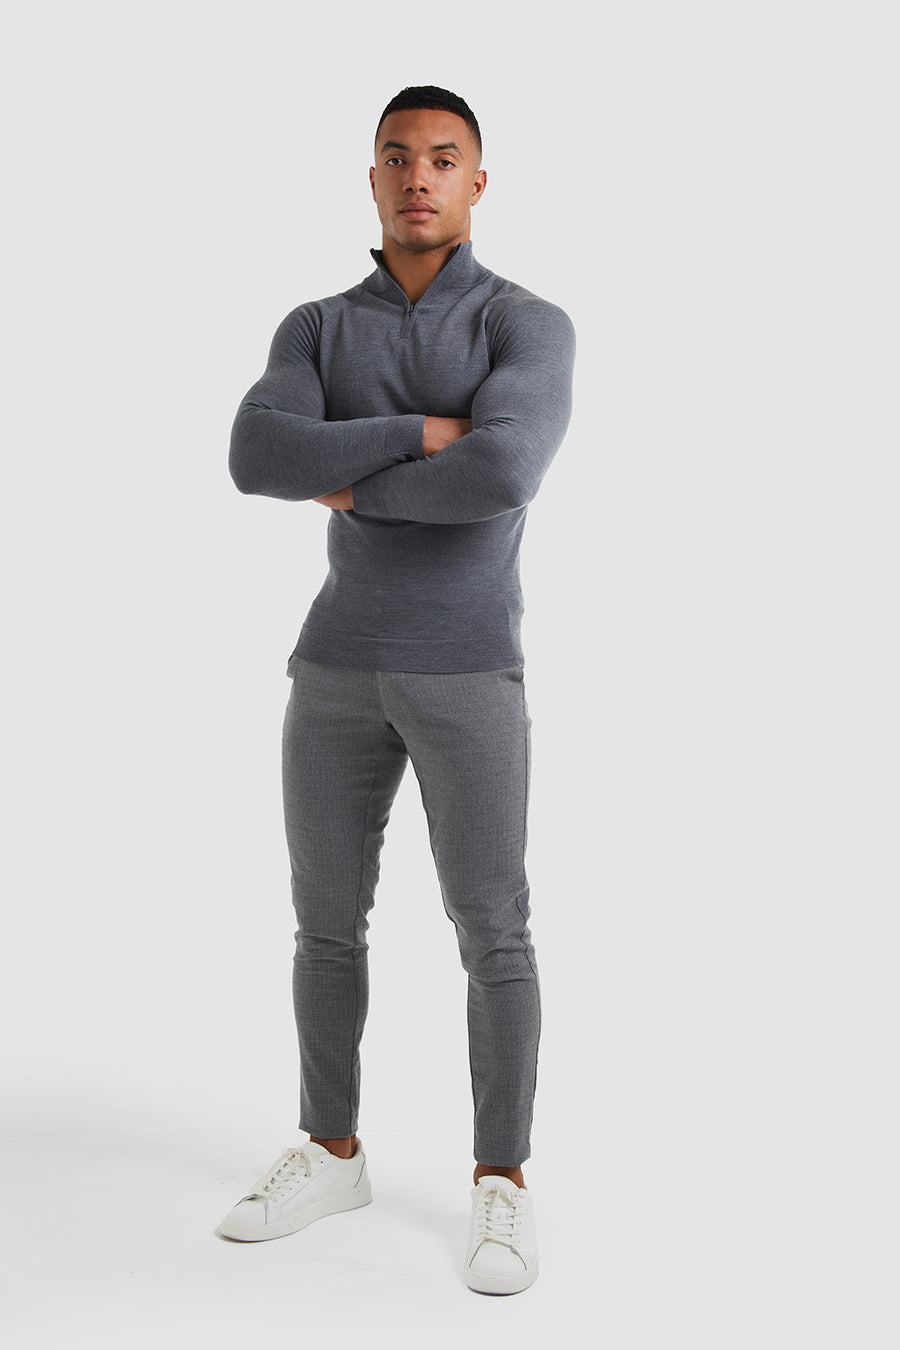 Athletic Fit Knitwear - TAILORED ATHLETE - USA